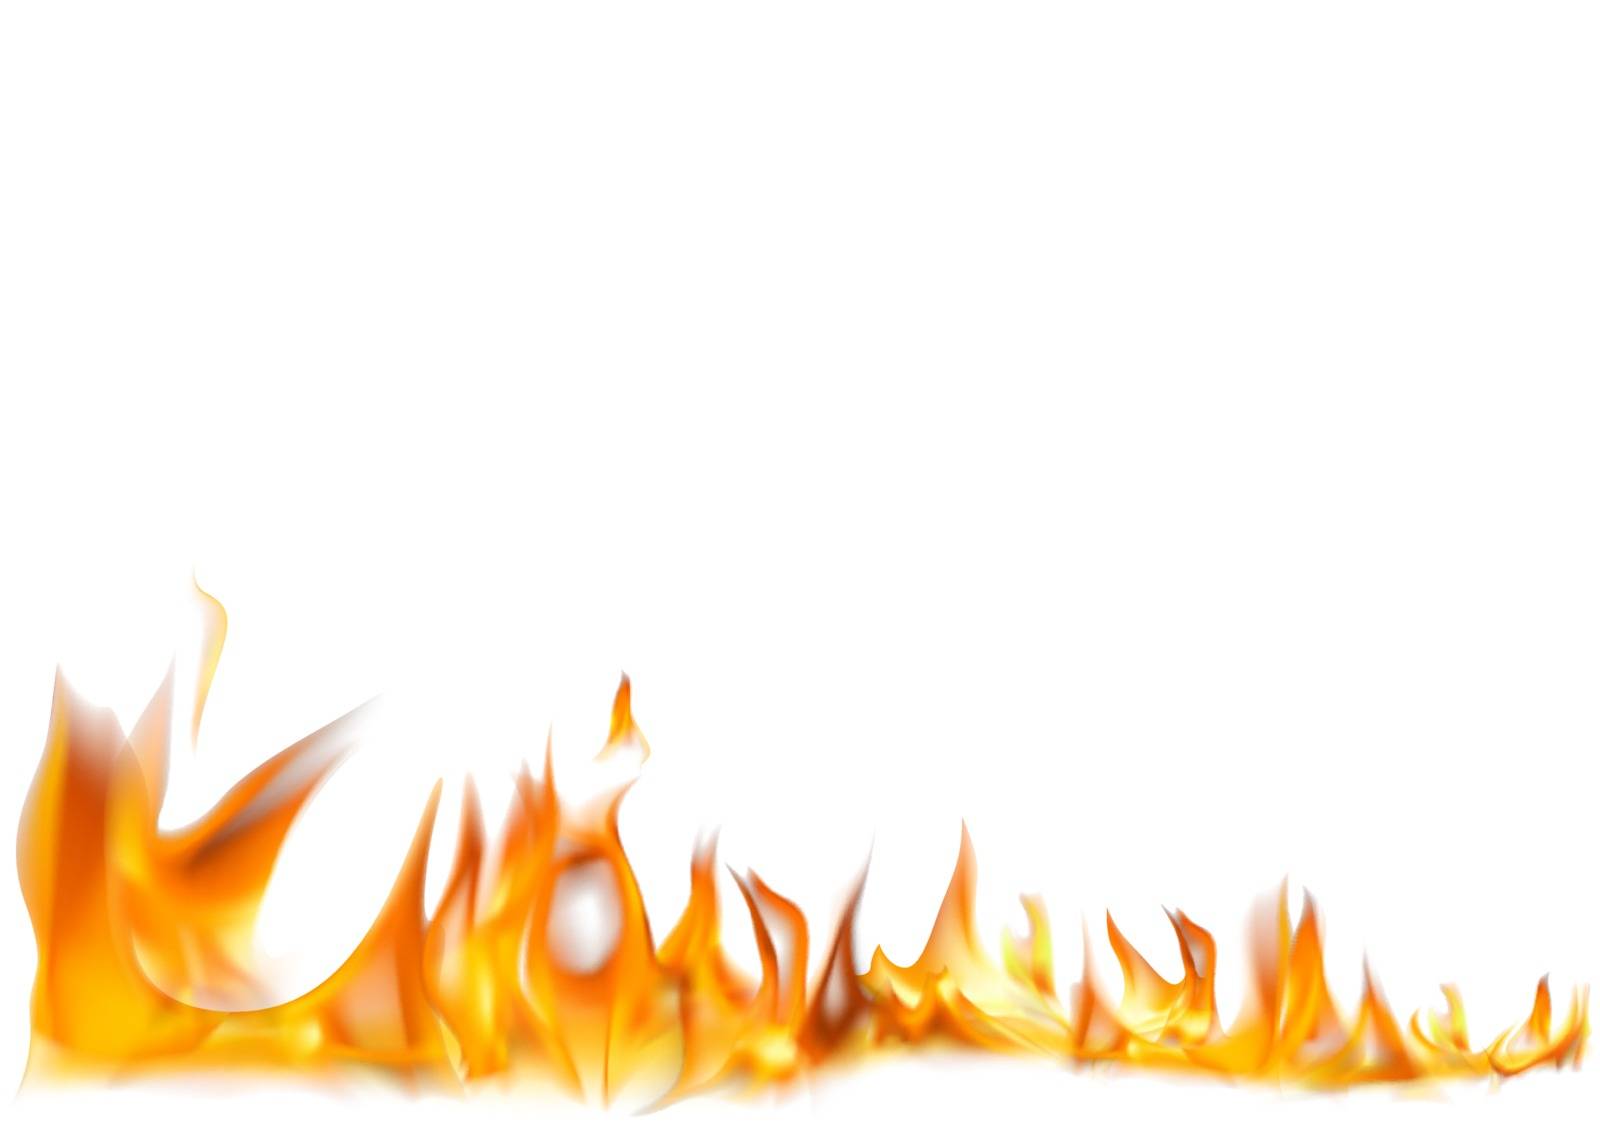 Realistic Fire Flames Background by illustratorCZ